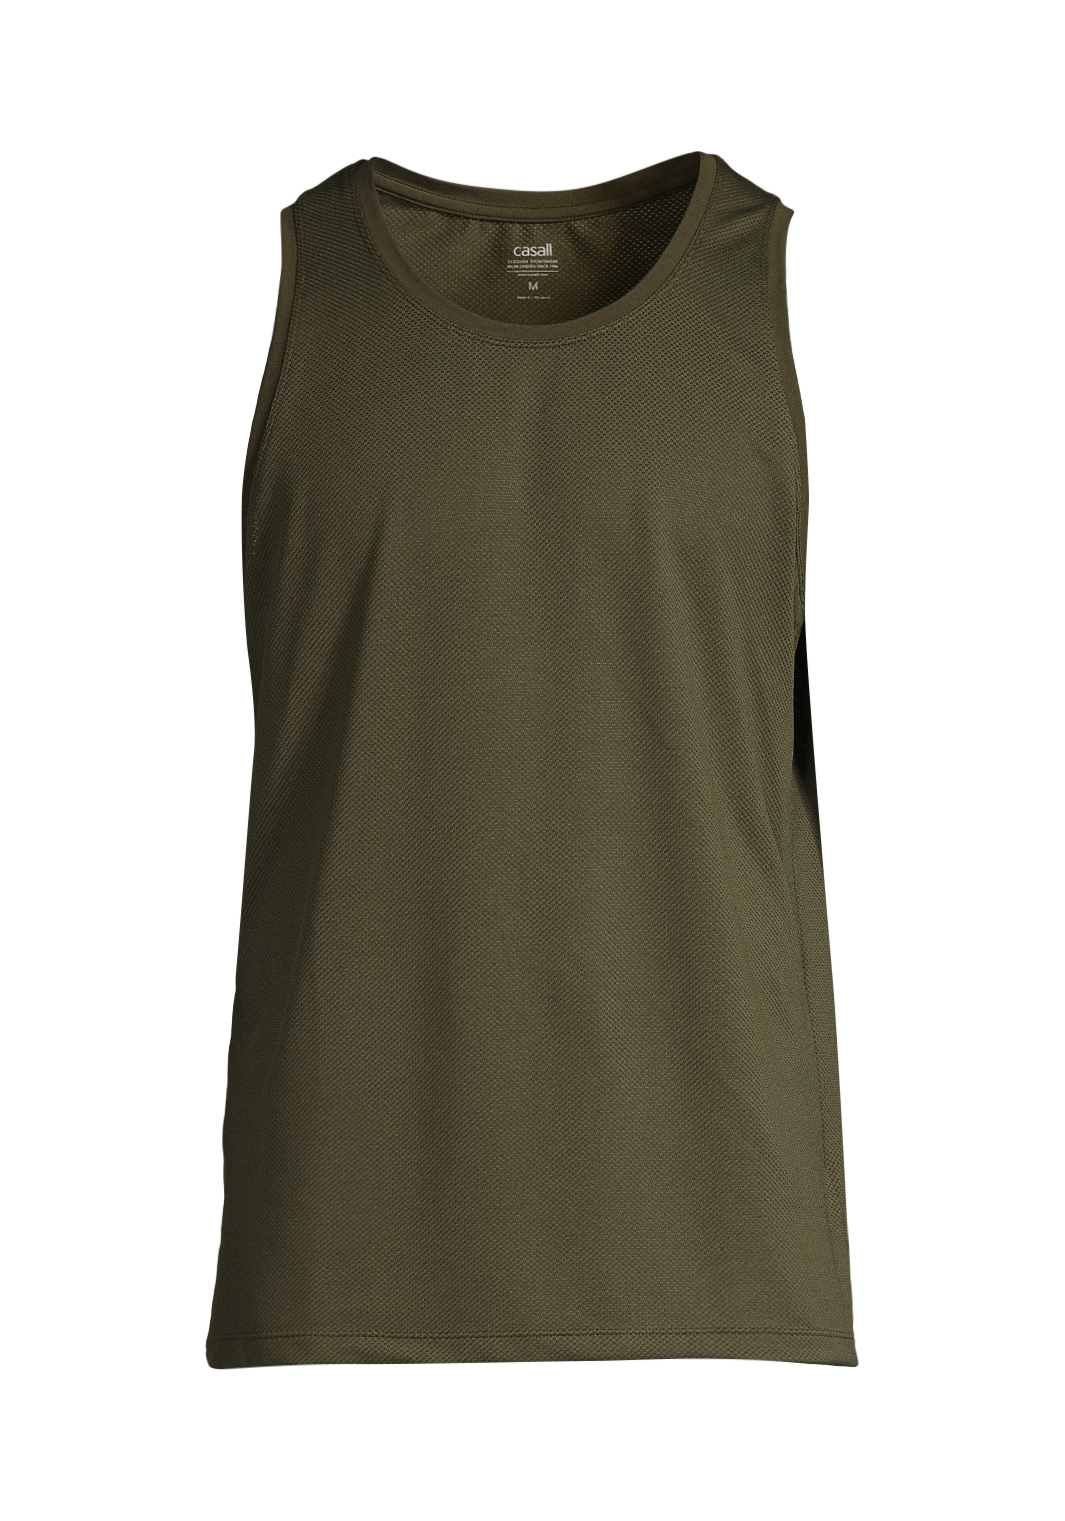 M Structured Tank - Forest Green